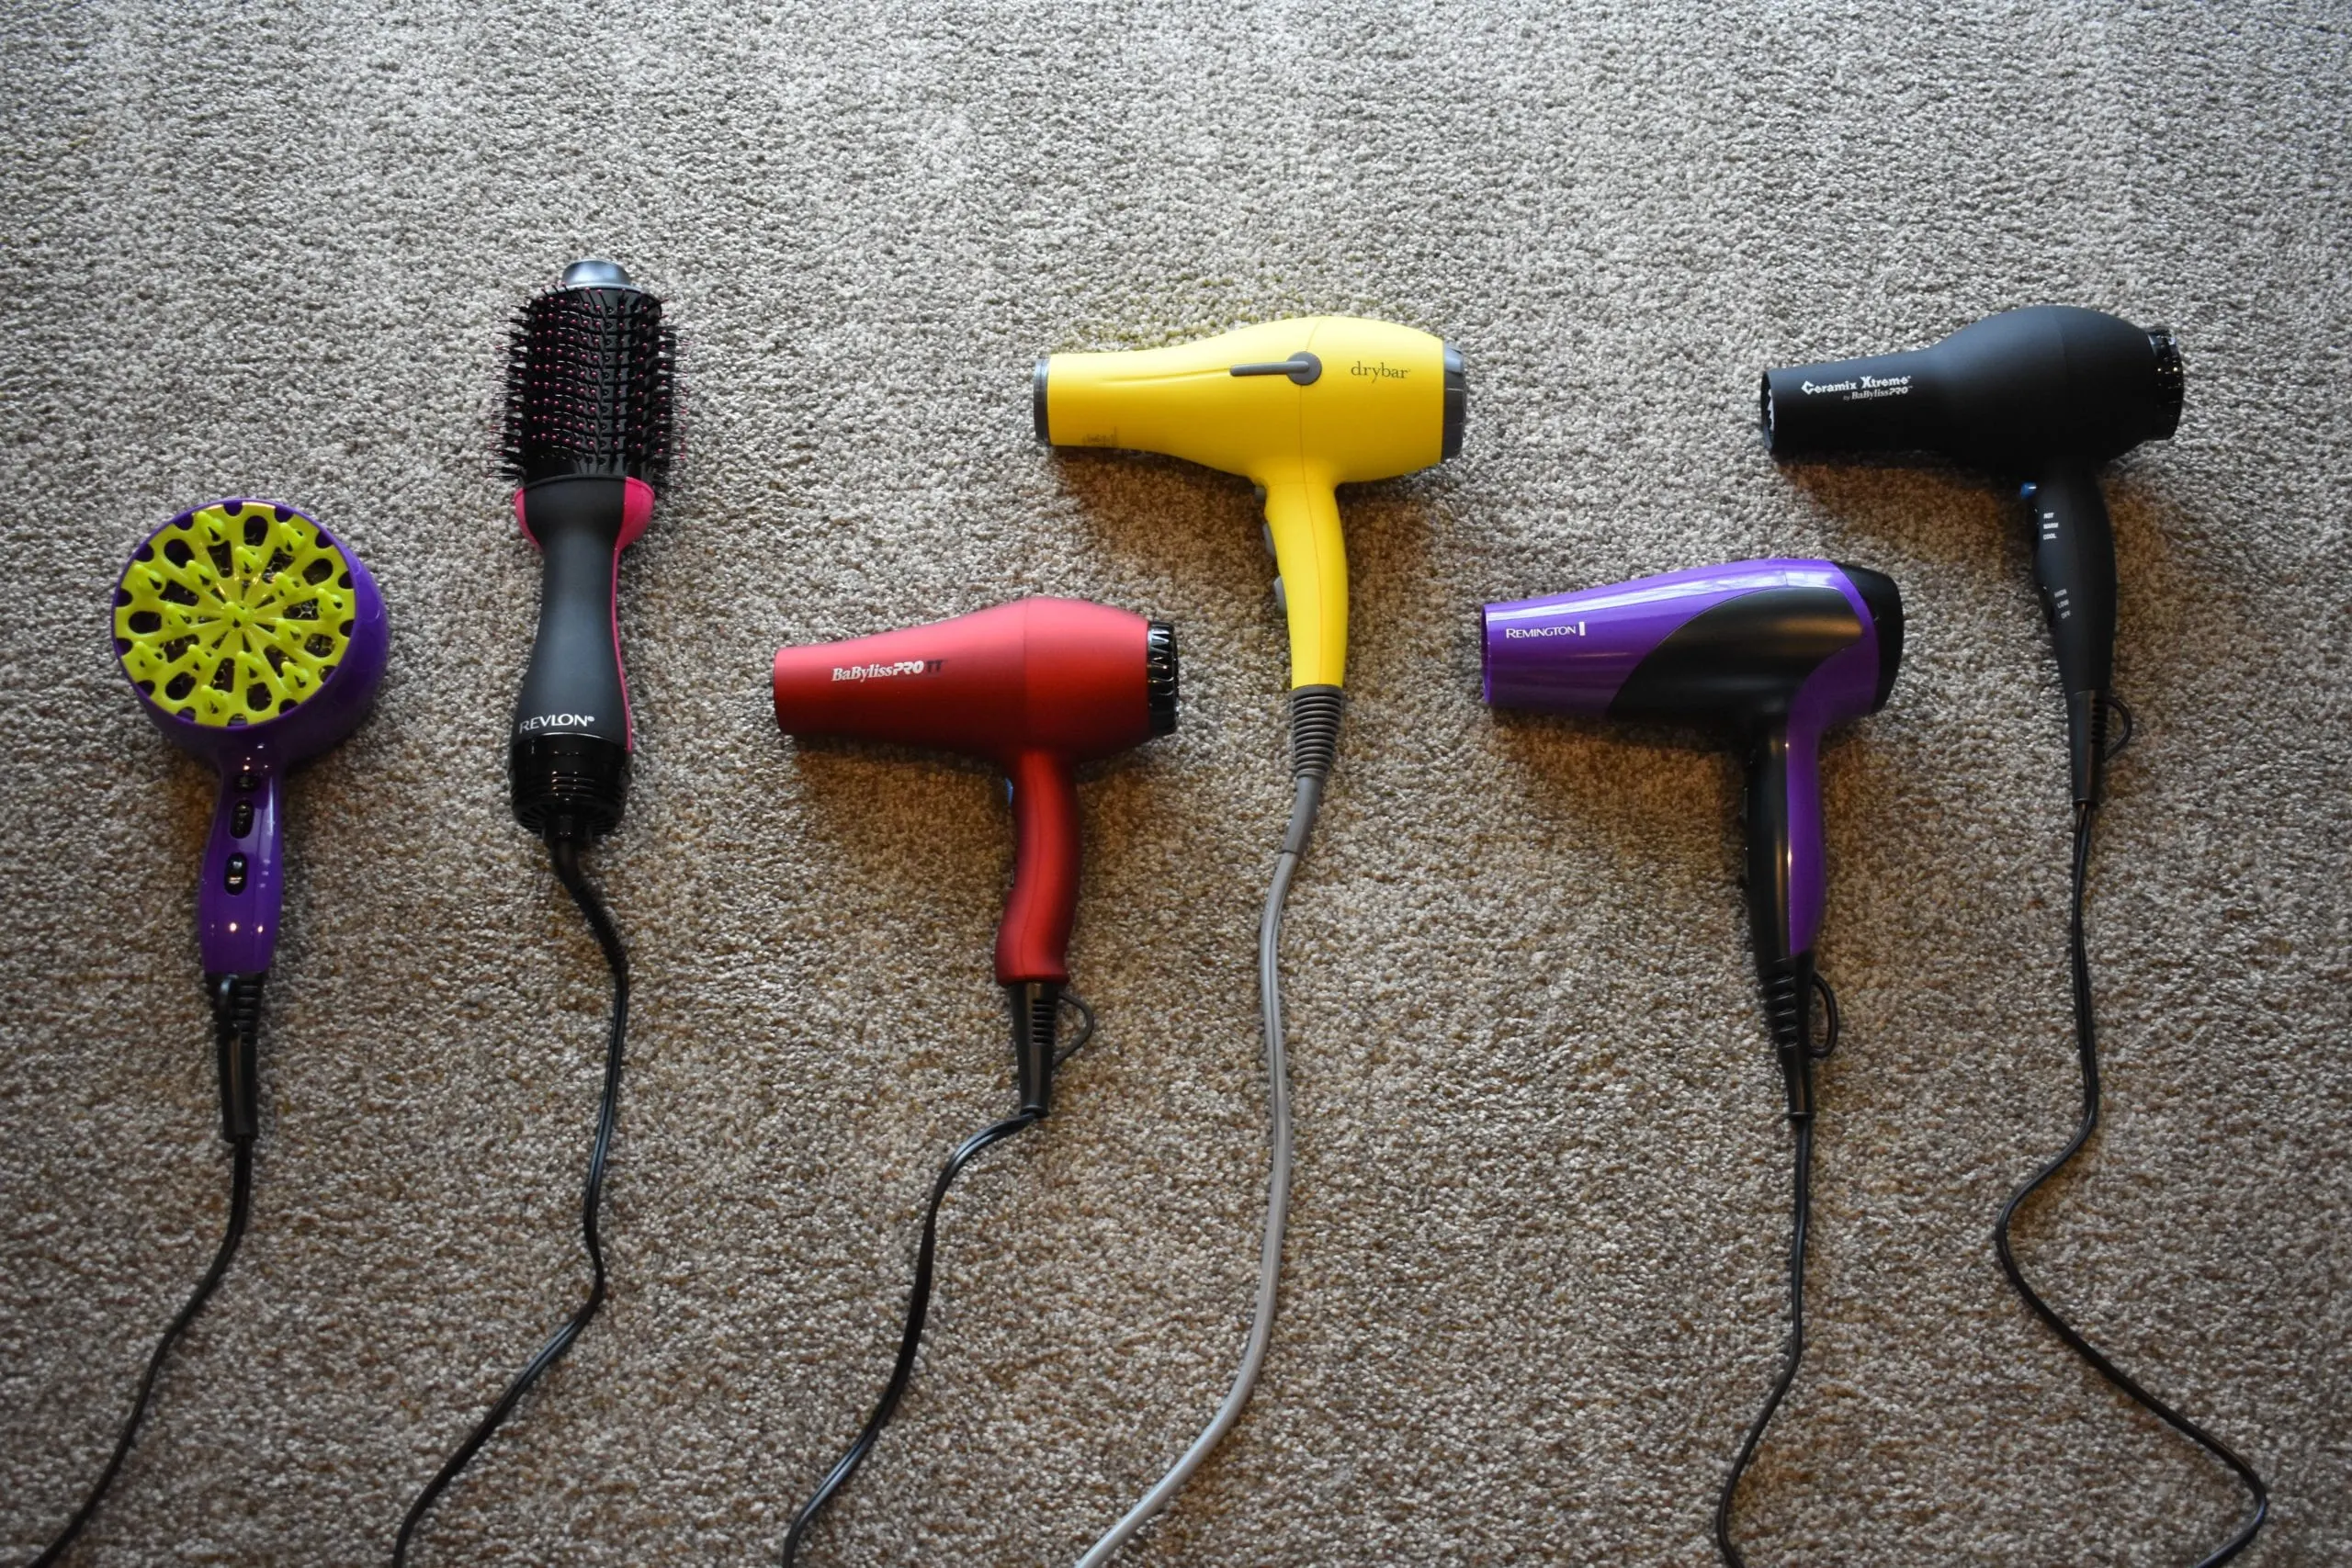 The best hair dryers on our list all sitting on a recently vacuumed carpet floor